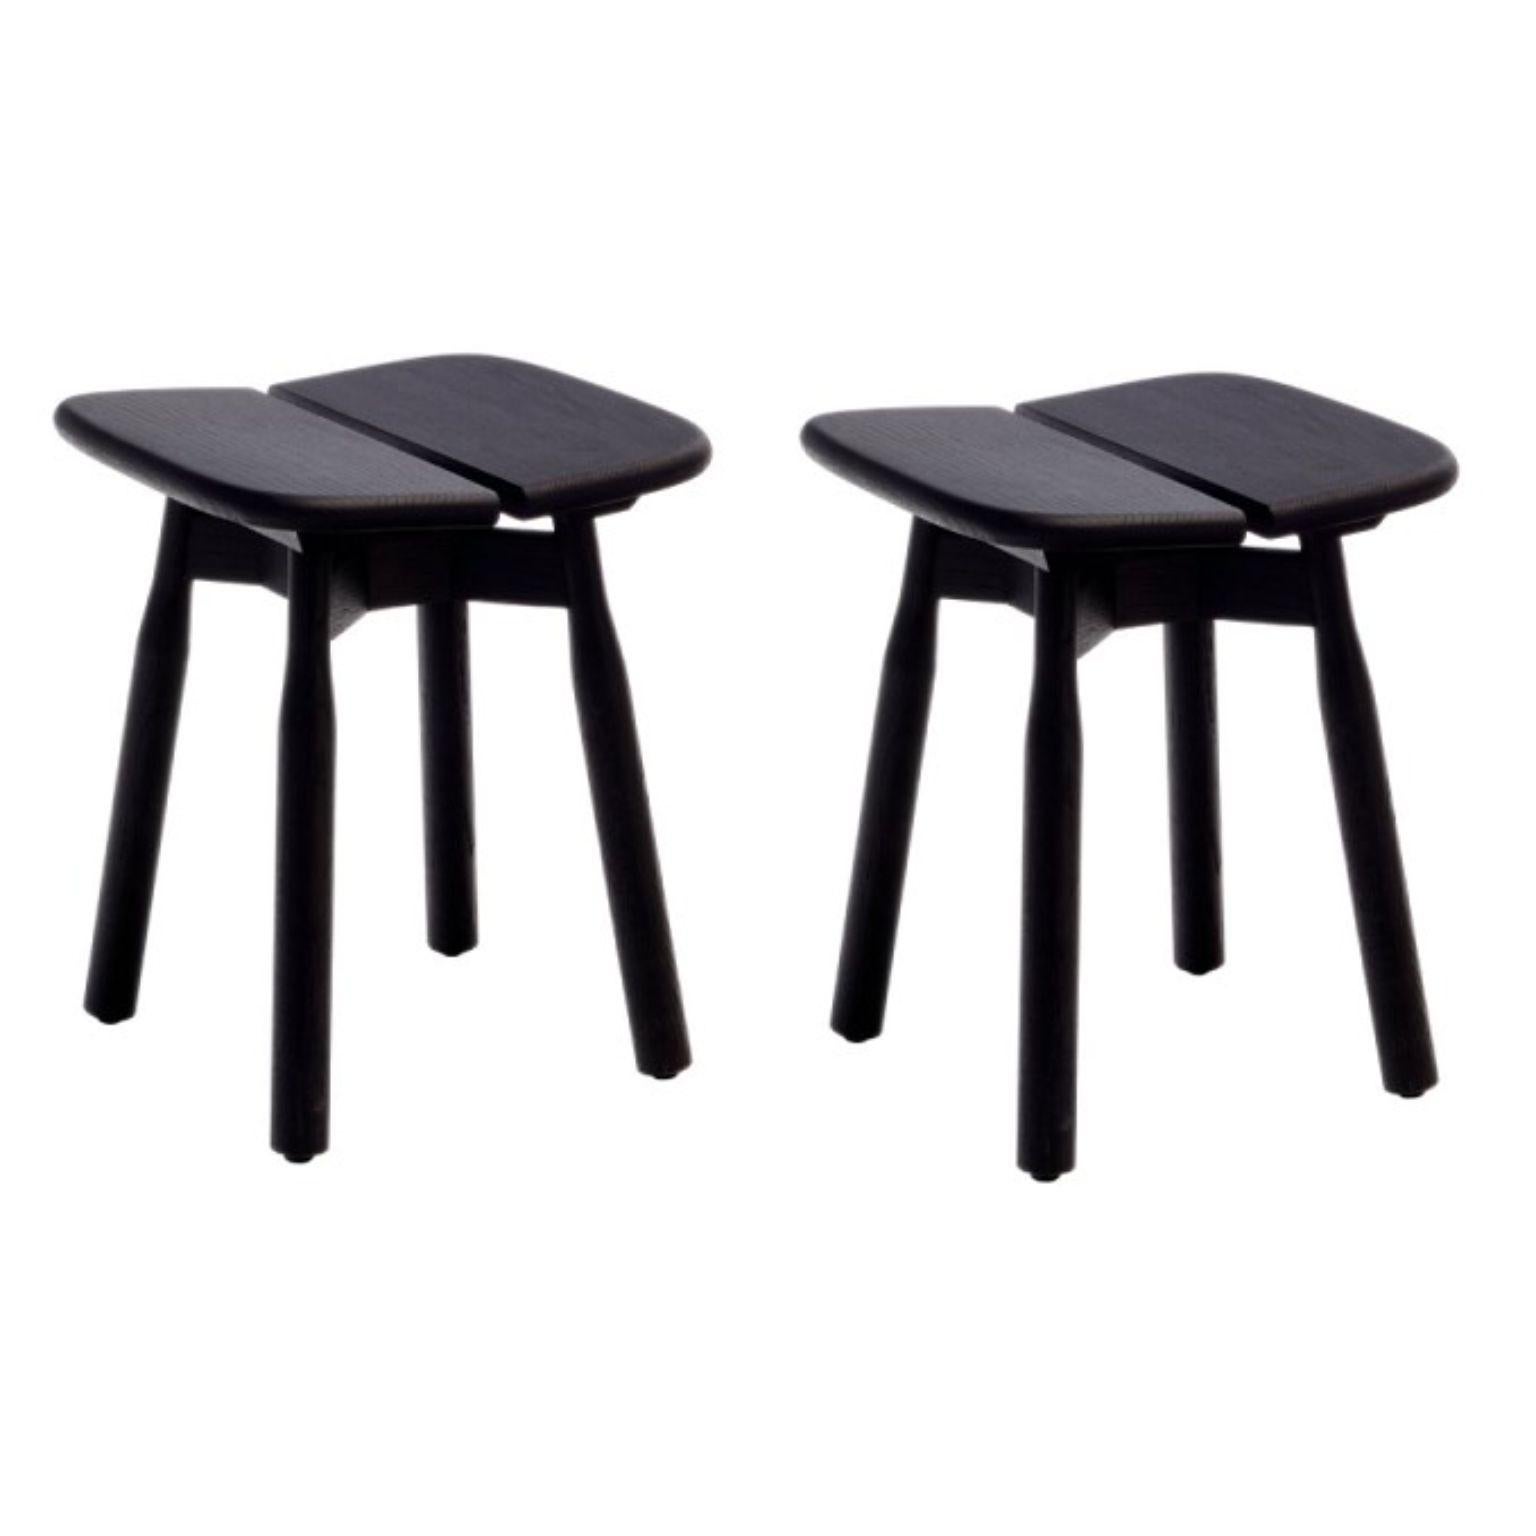 Set of 2 Black Stained Oak DOM Stools by Marcos Zanuso Jr
Materials: Low stool, structure, and seat in solid oak, natural varnished or black stained.
Technique: Lacquered metal. Natural or stained wood. 
Dimensions: D 38 x W 40 x H 46 cm


Marco